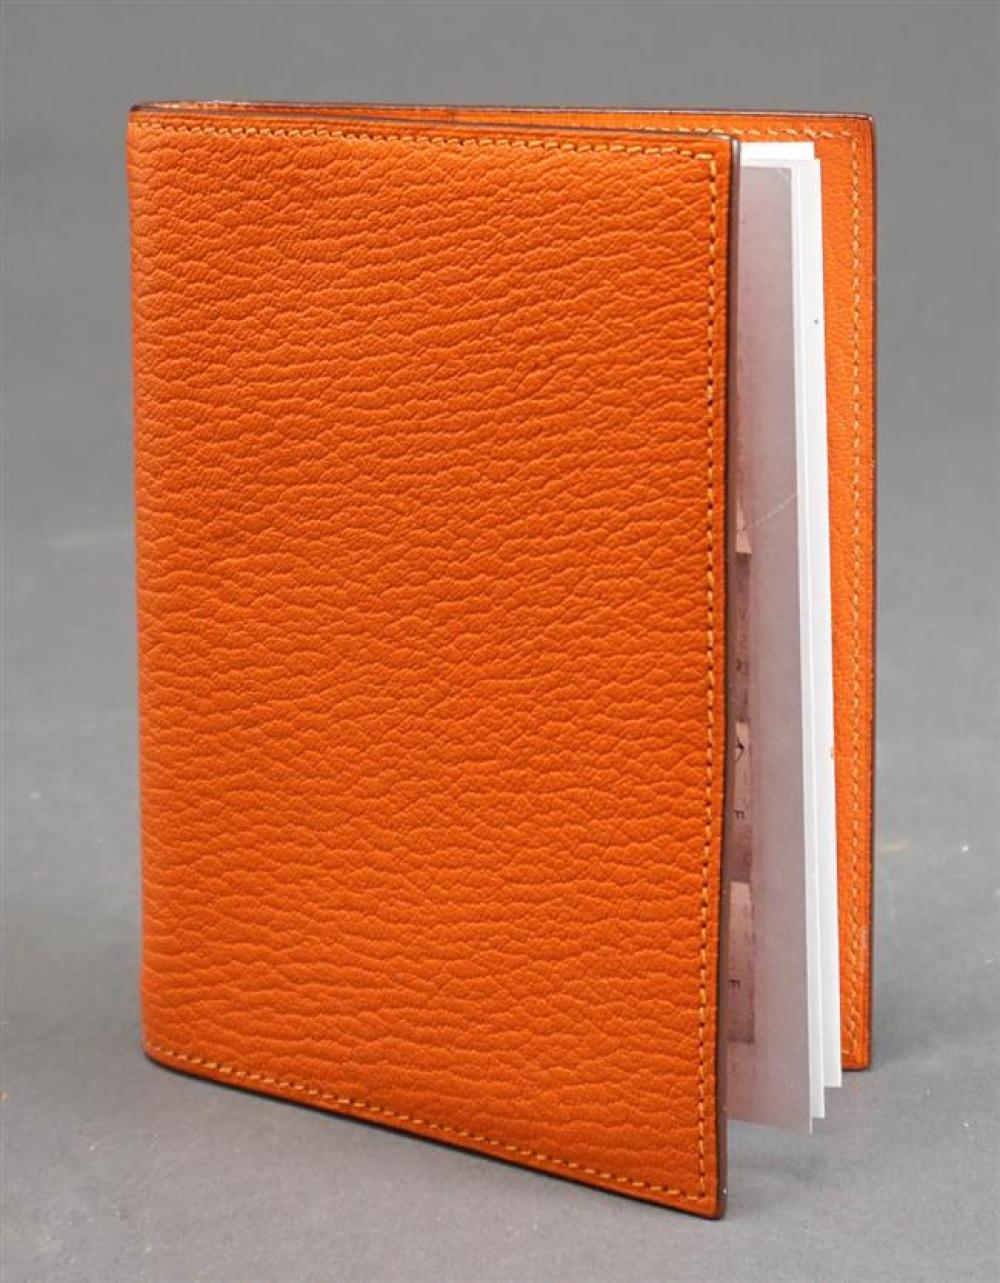 HERMES LEATHER AGENDA BOOK, WITH